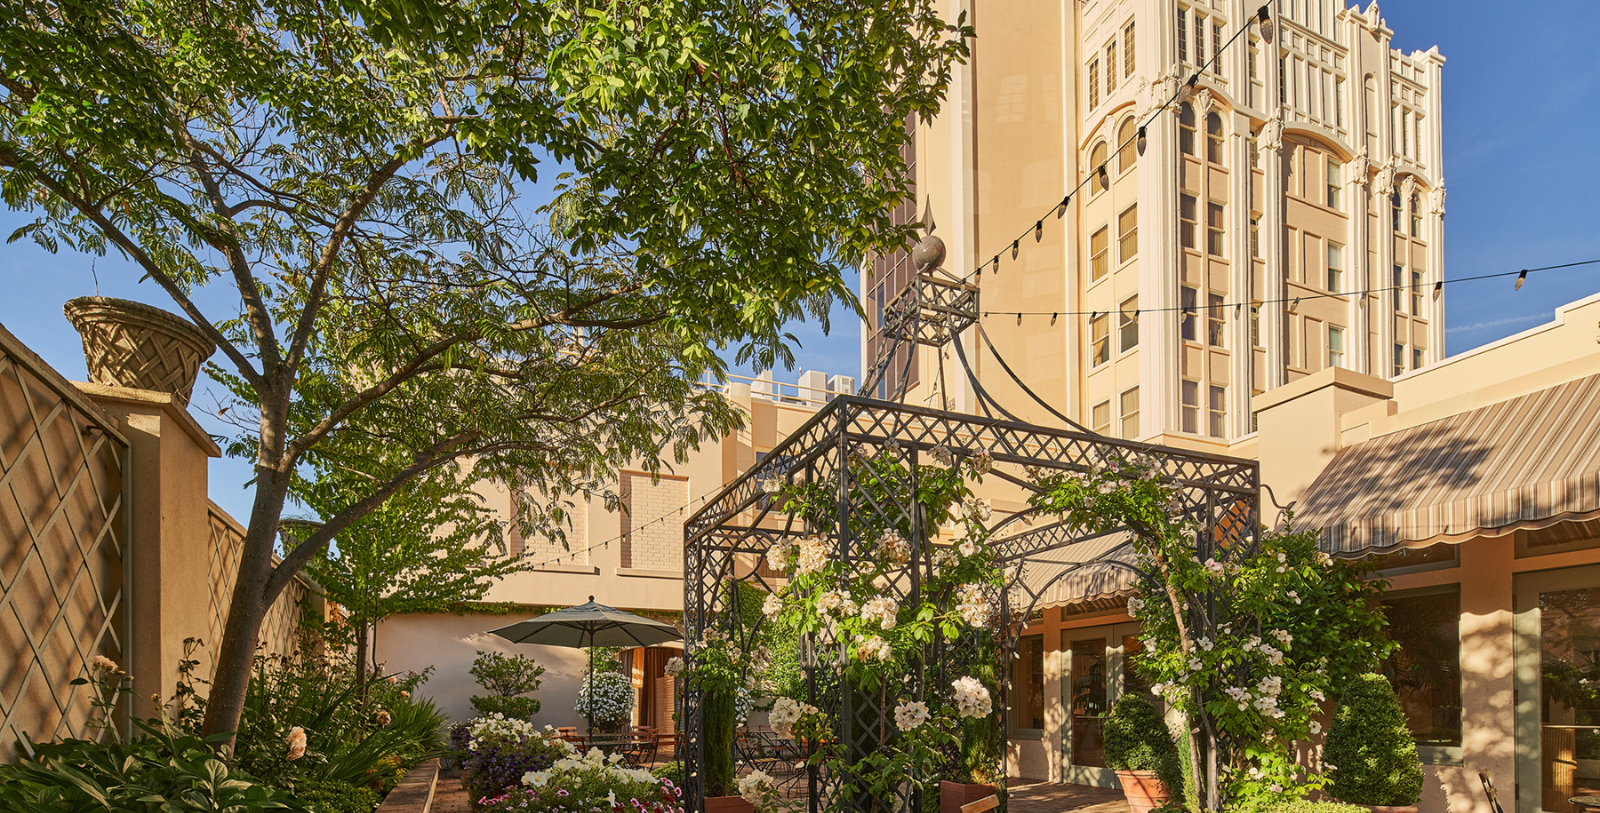 Discover preserved historic elements throughout the Ashland Springs Hotel.